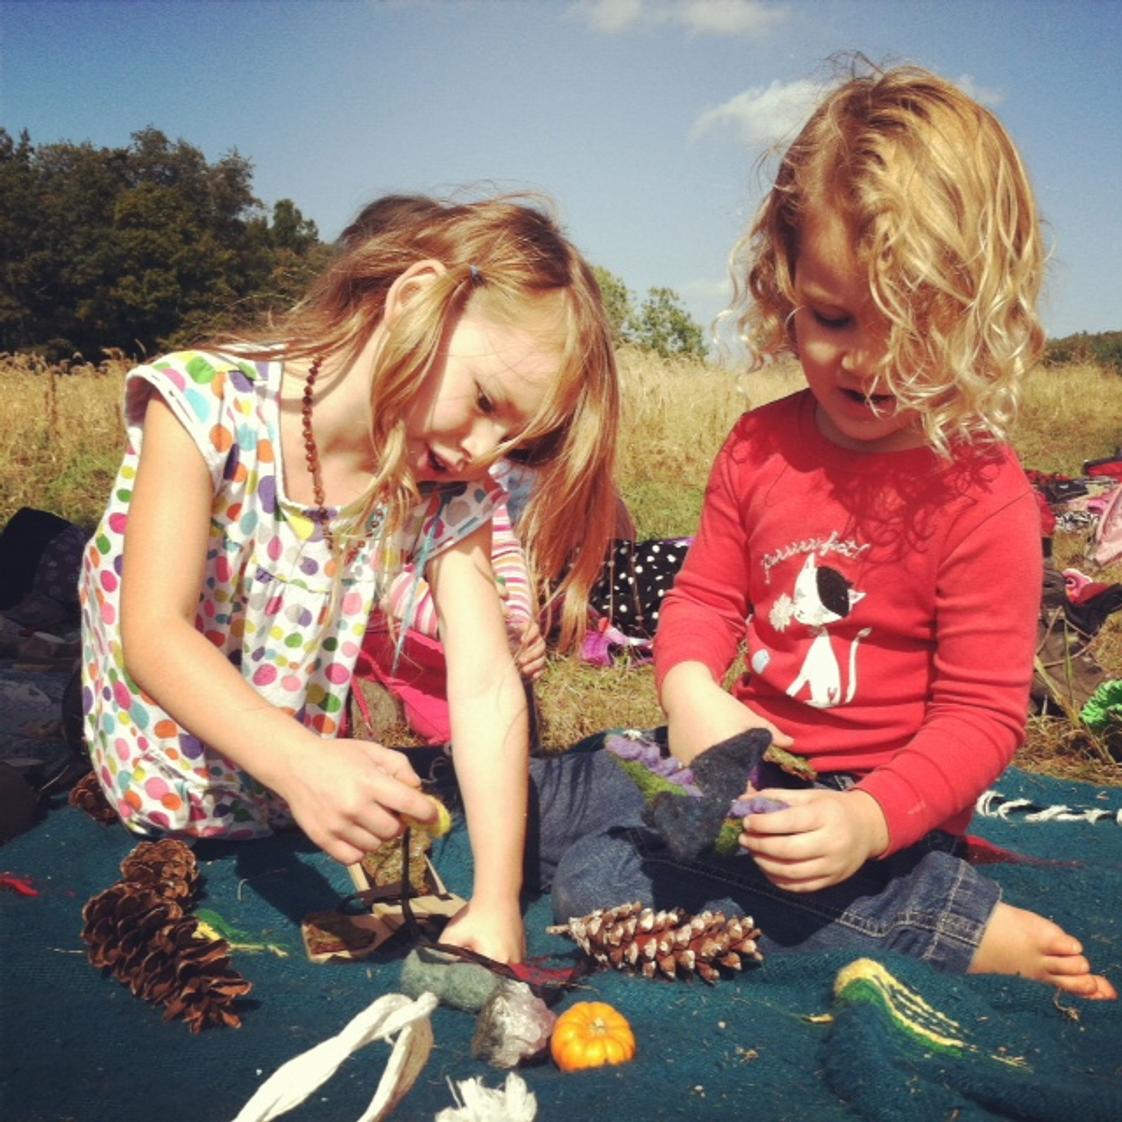 Sustainable Farm School Photo #1 - The Little Sprouts Program (ages 3 to 5) focuses on walking in balance with the natural world and learning to stay connected to our inner joy.